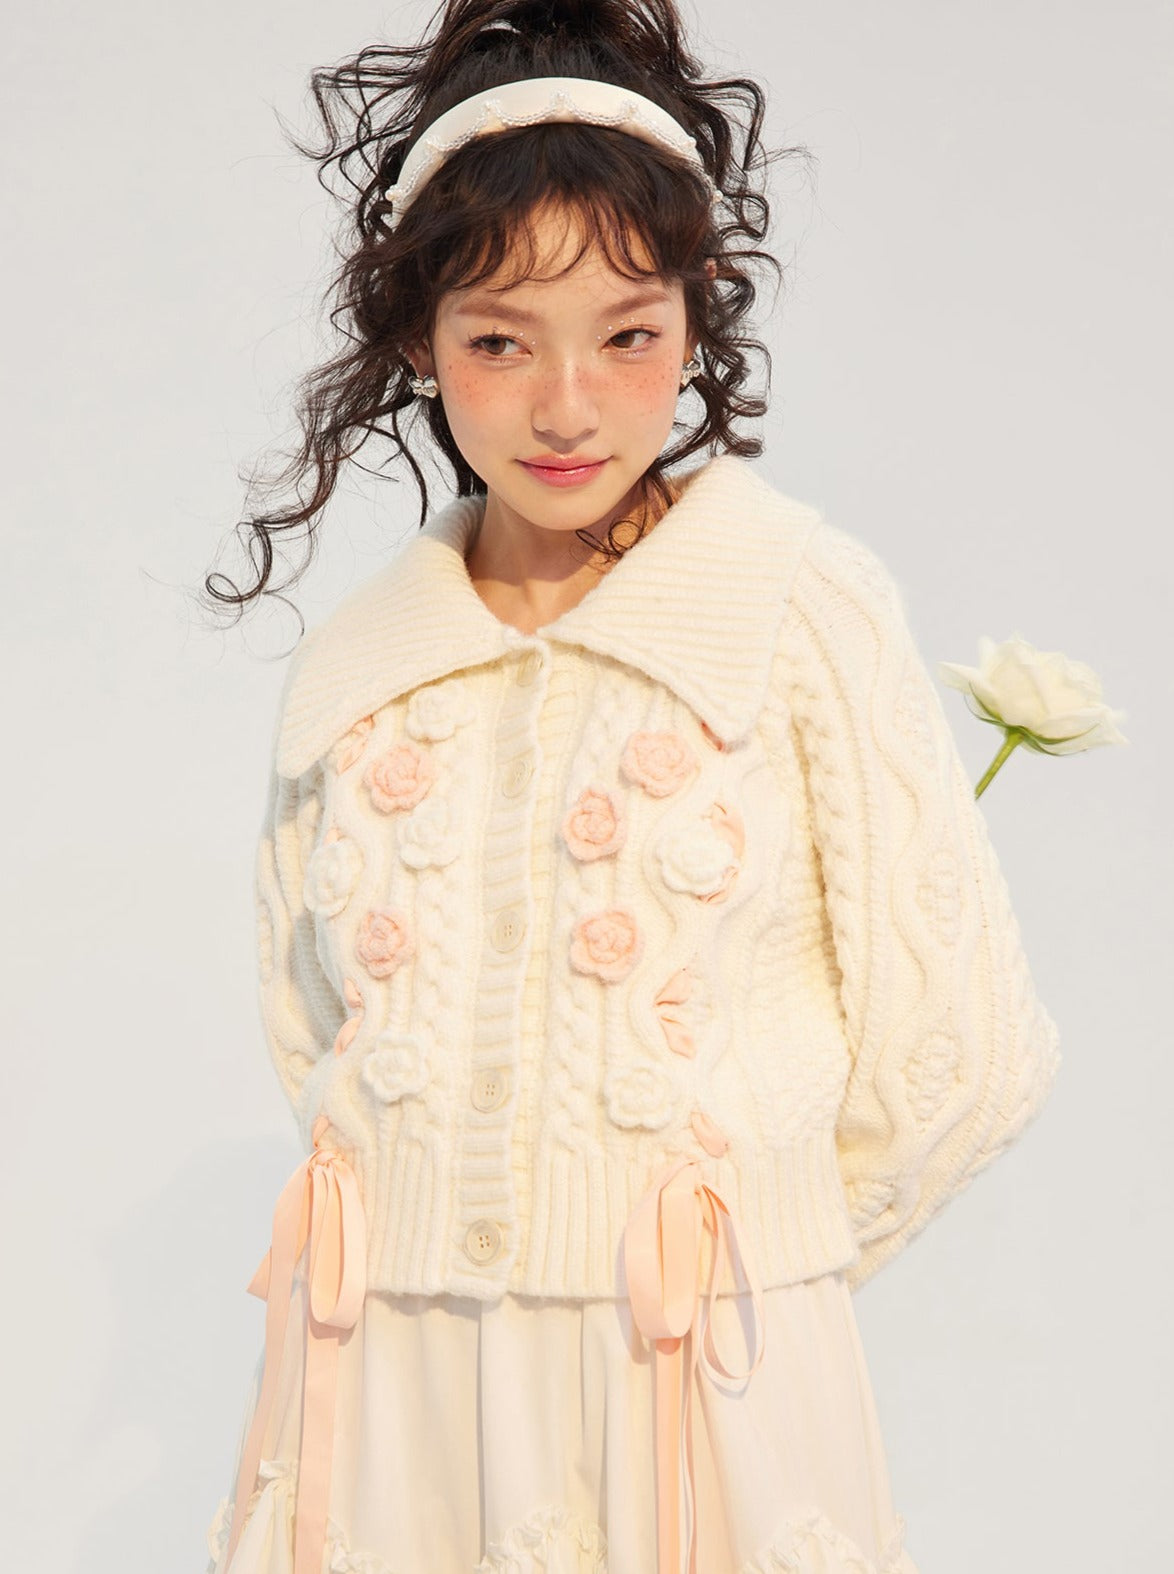 Flower Cable Knit Cardigan